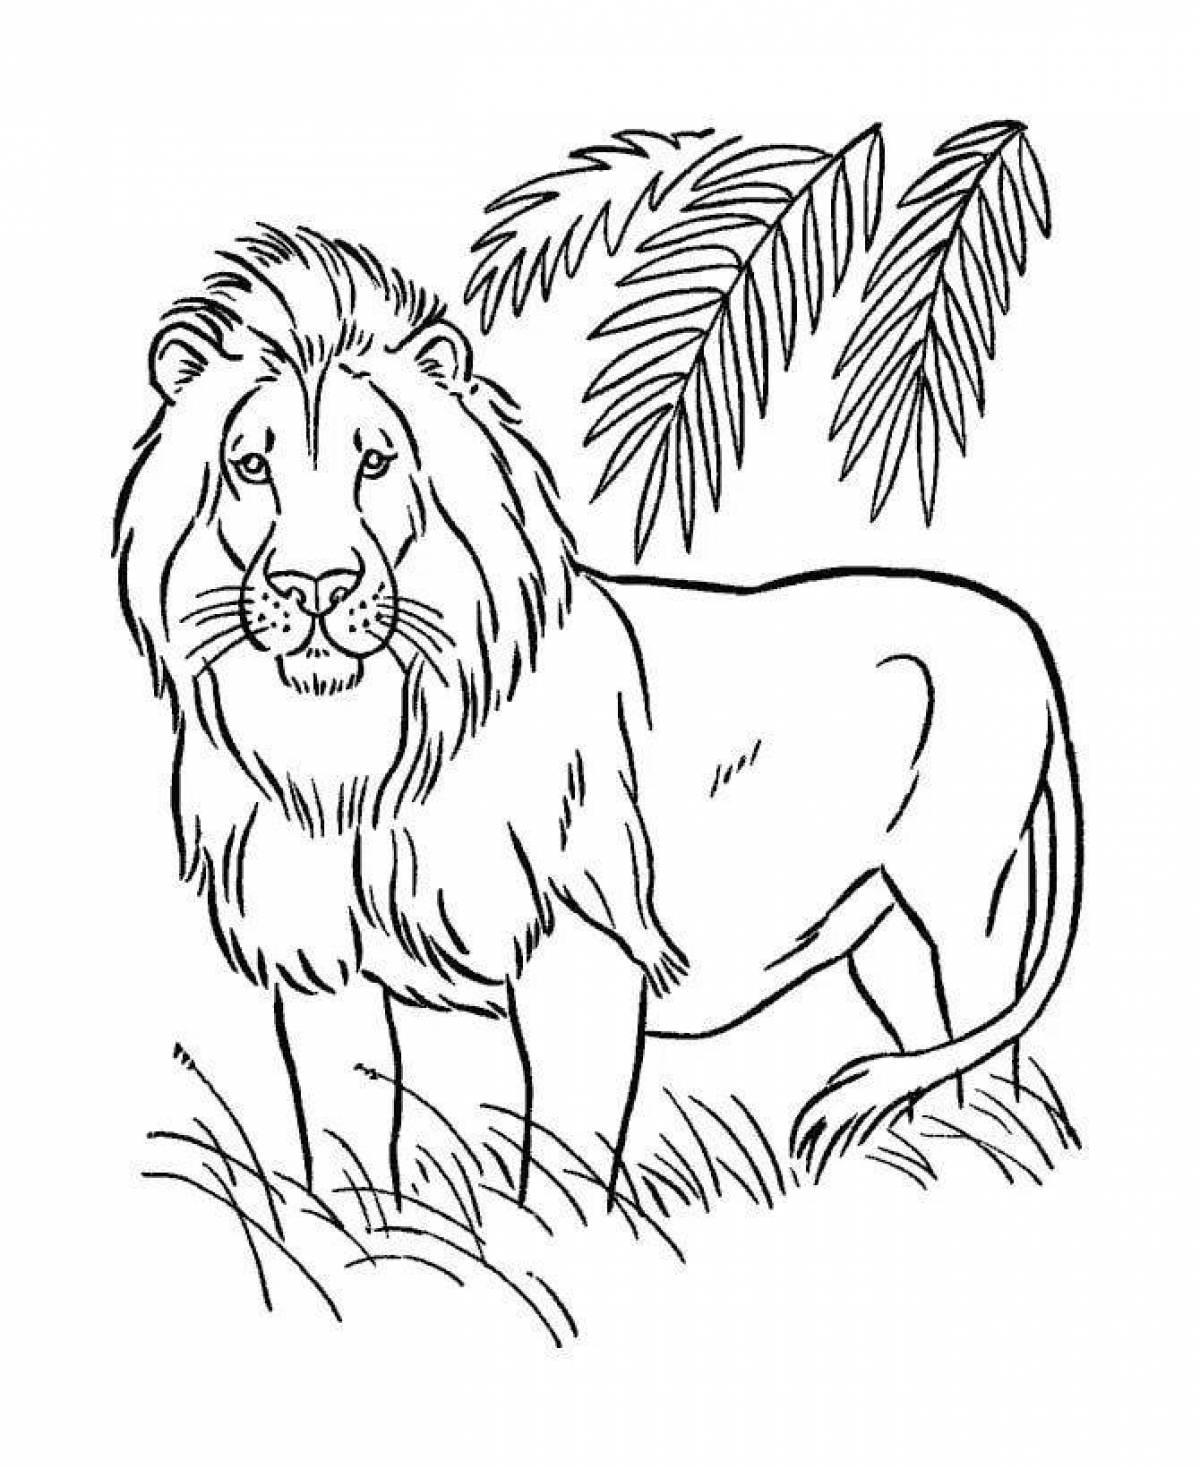 Funny African animals coloring book for kids 6-7 years old